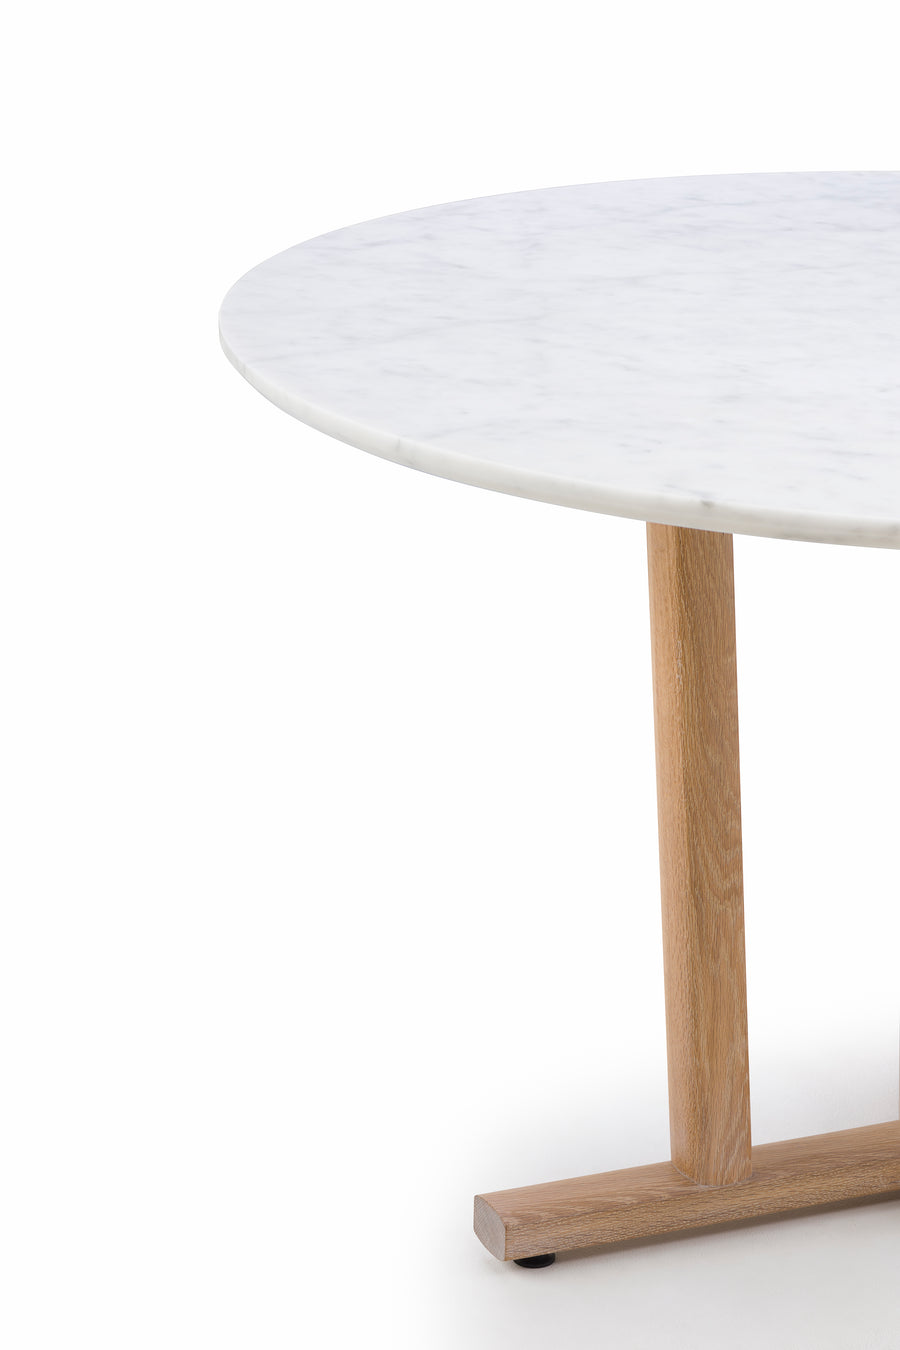 Shaker Round Dining Table